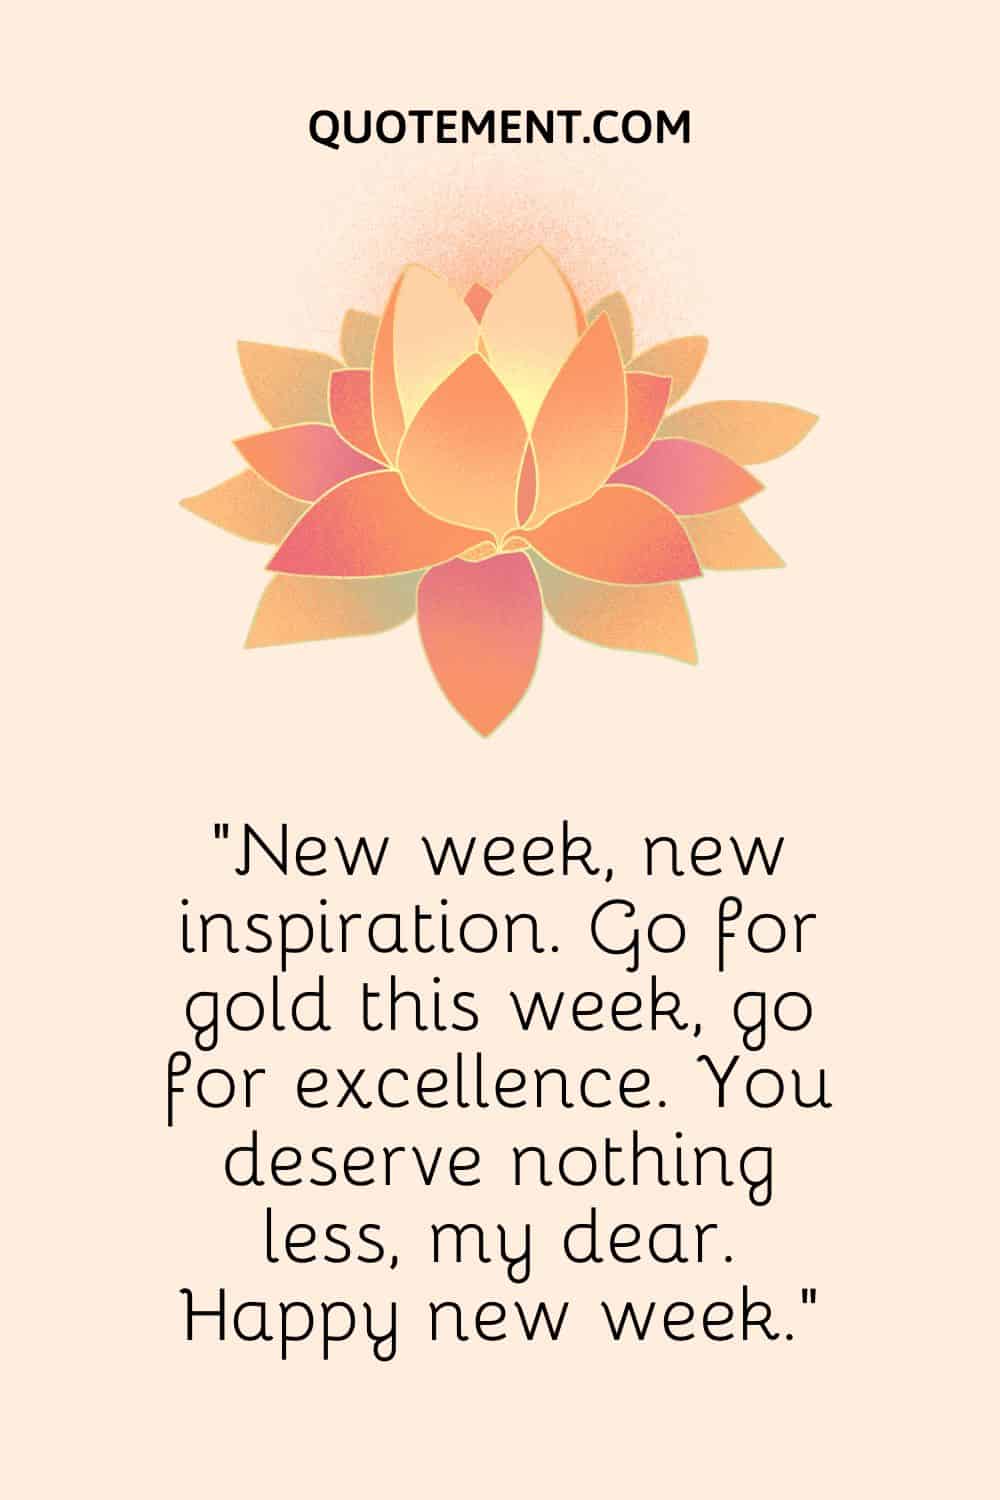 Go for gold this week